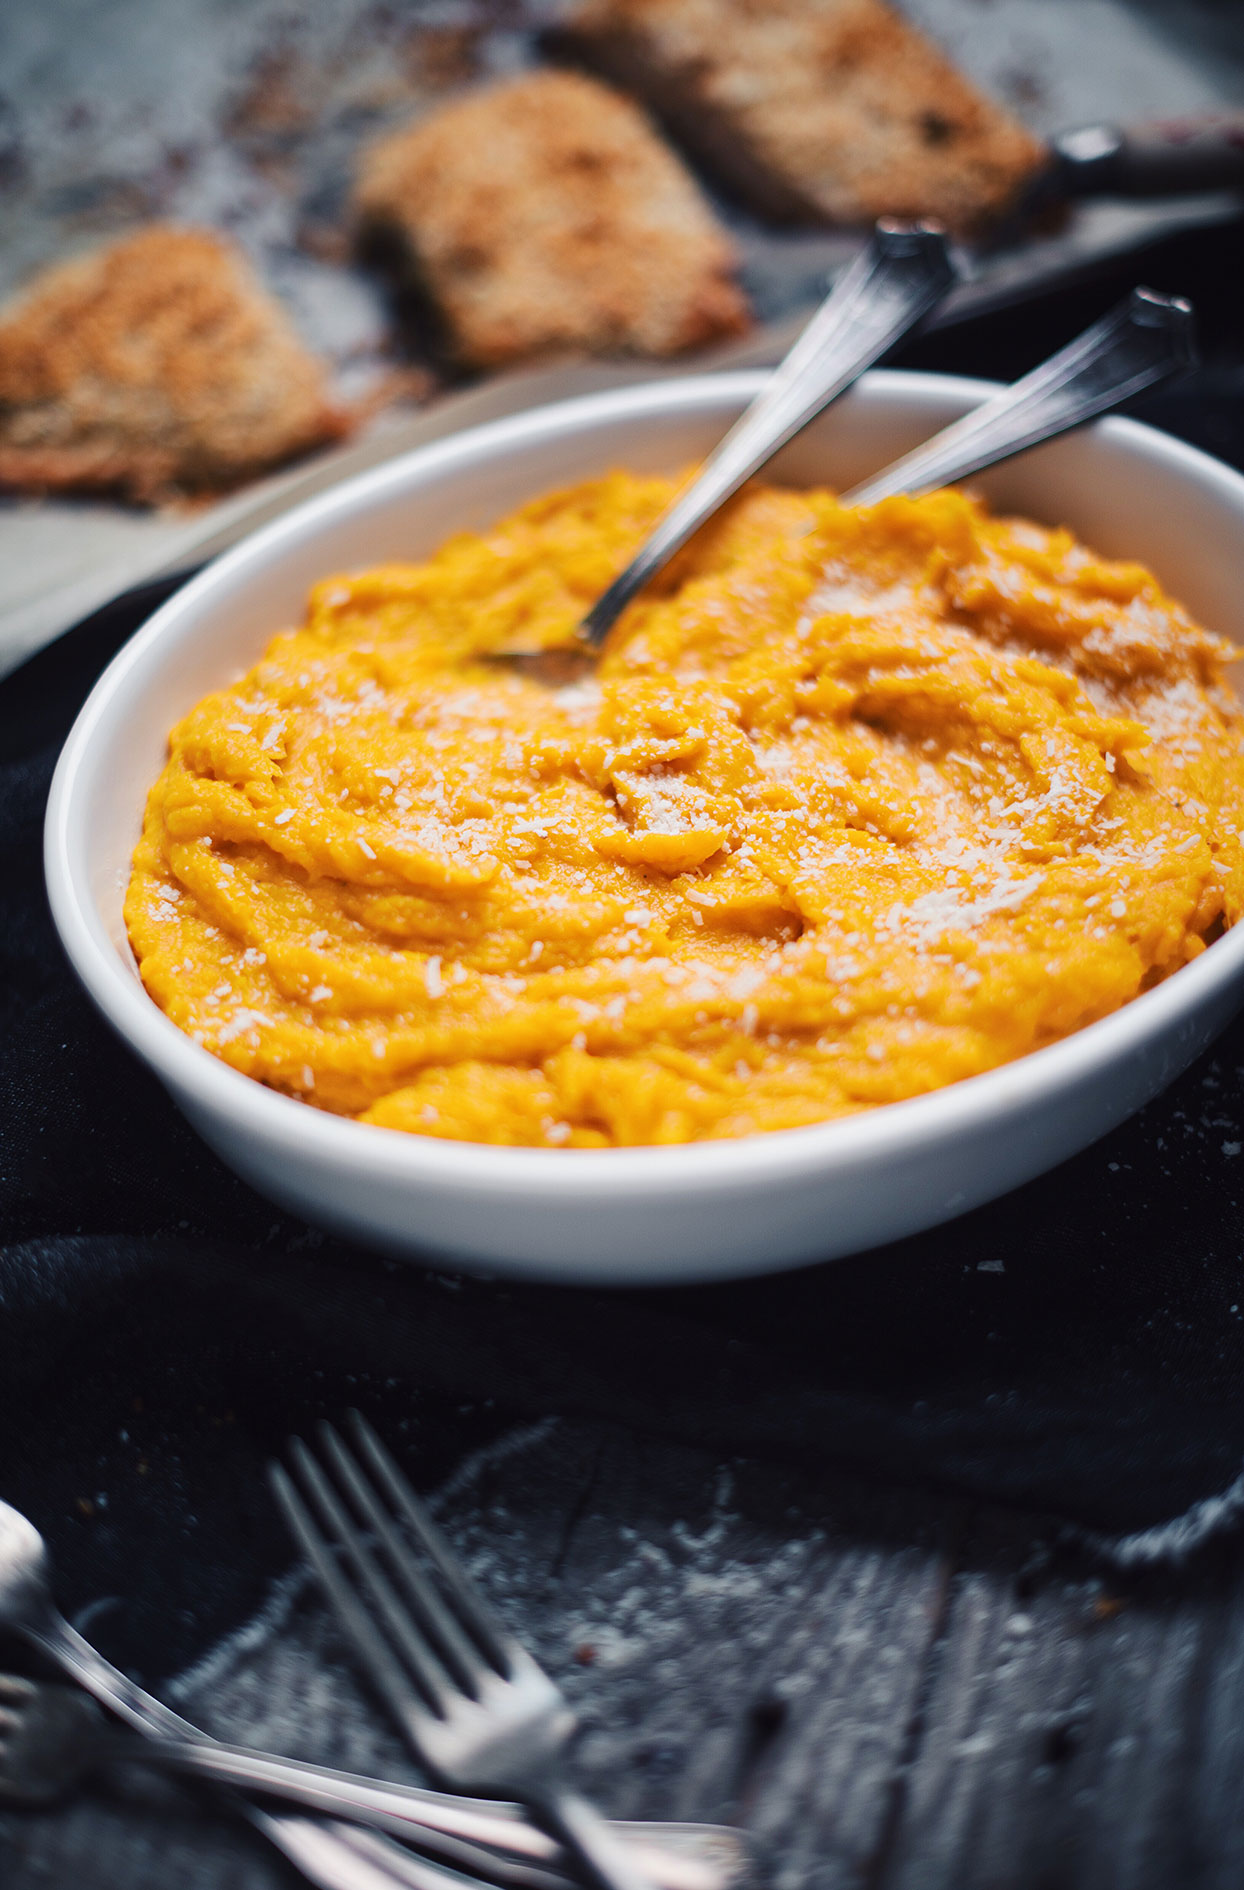 Squash and sweet potato puree with parmesan cheese